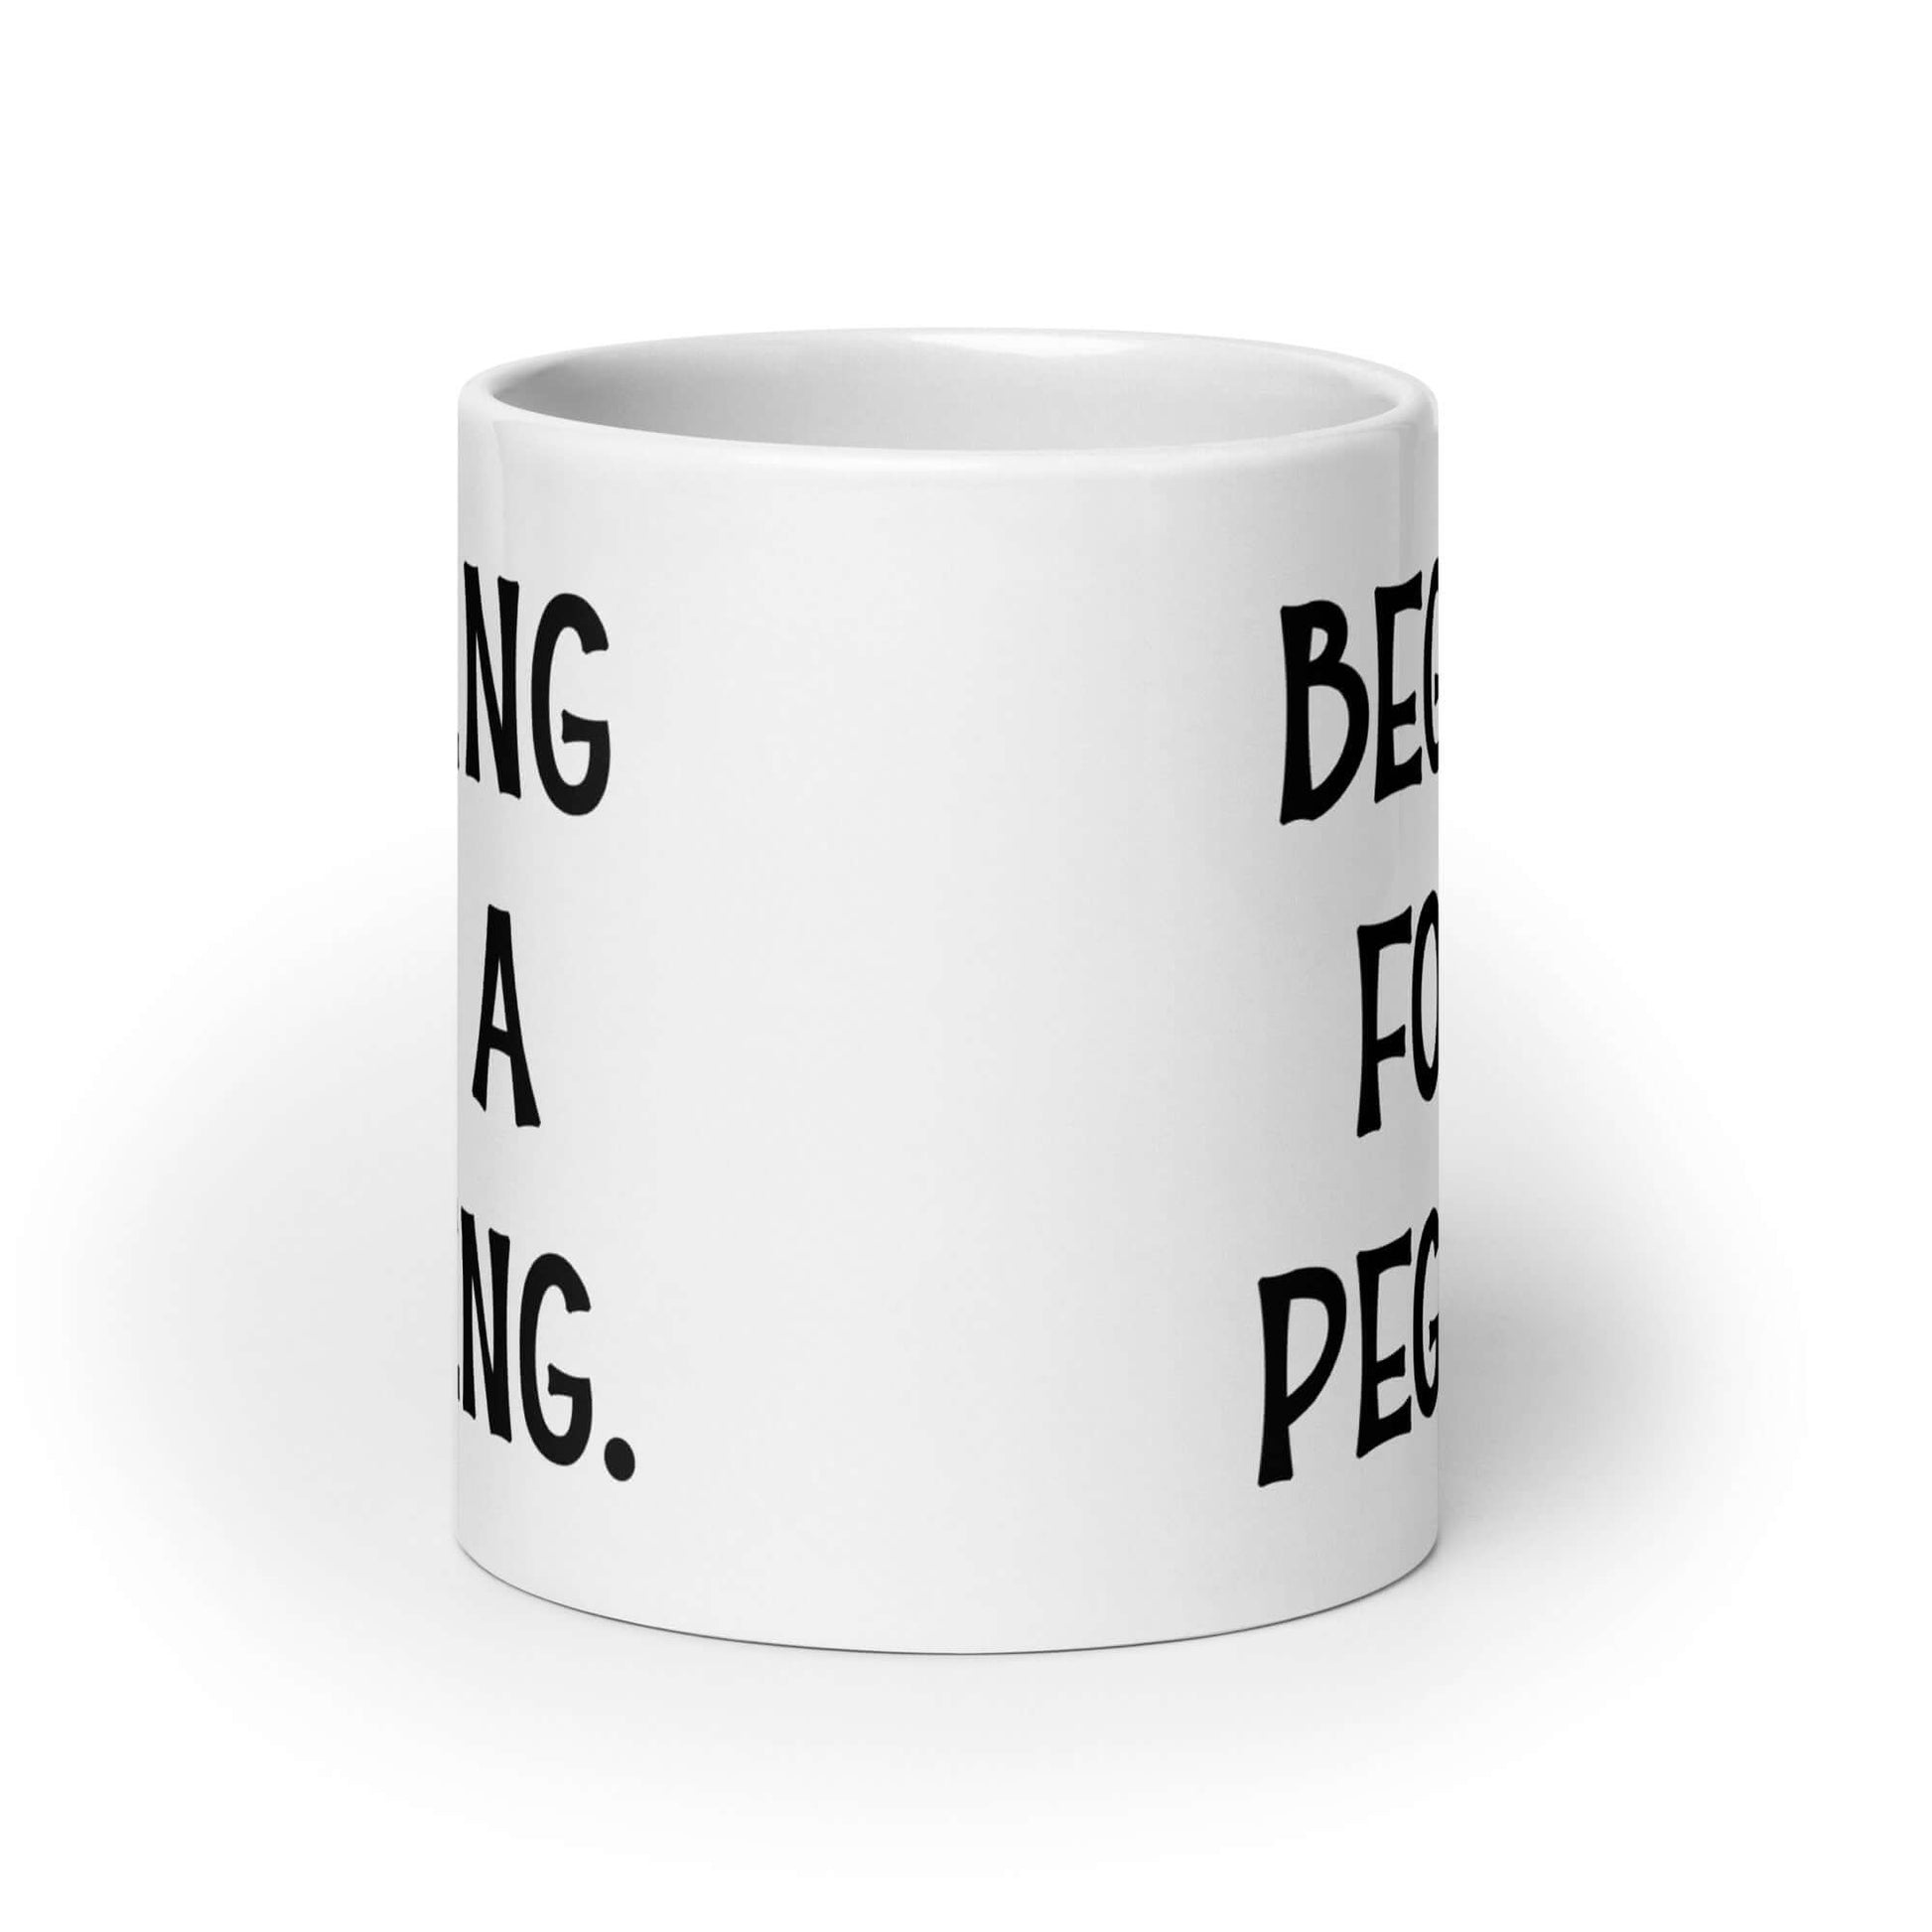 White ceramic coffee mug with the words Begging for a pegging printed on both sides.